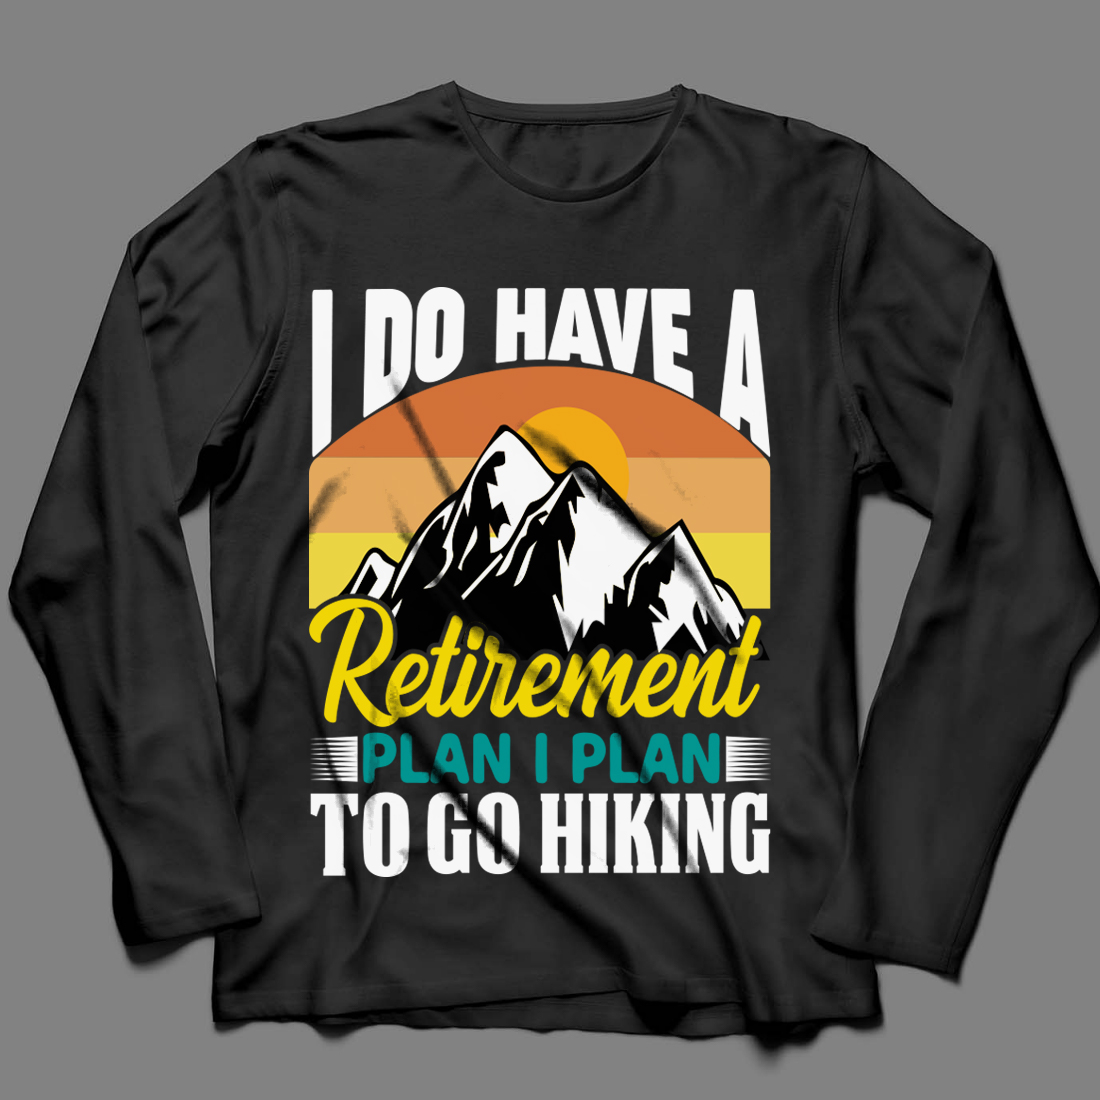  I do have a Retirement Plan Typography t shirt Design : Clothing,  Shoes & Jewelry